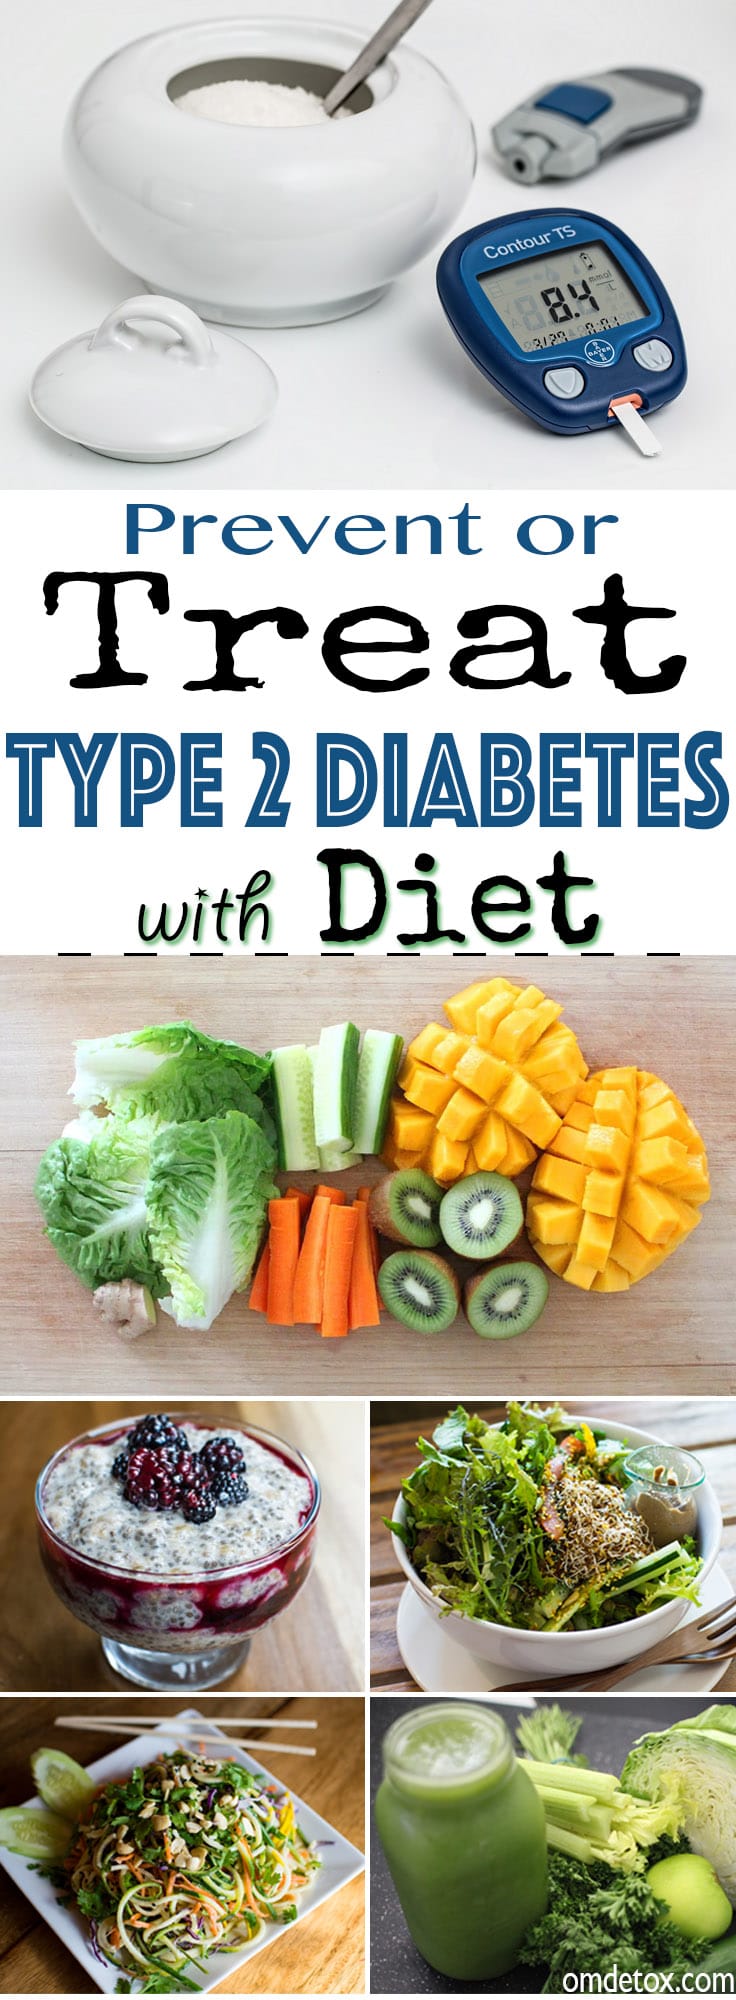 Treating Type 2 Diabetes with Diet, control your Diabetes with whole foods